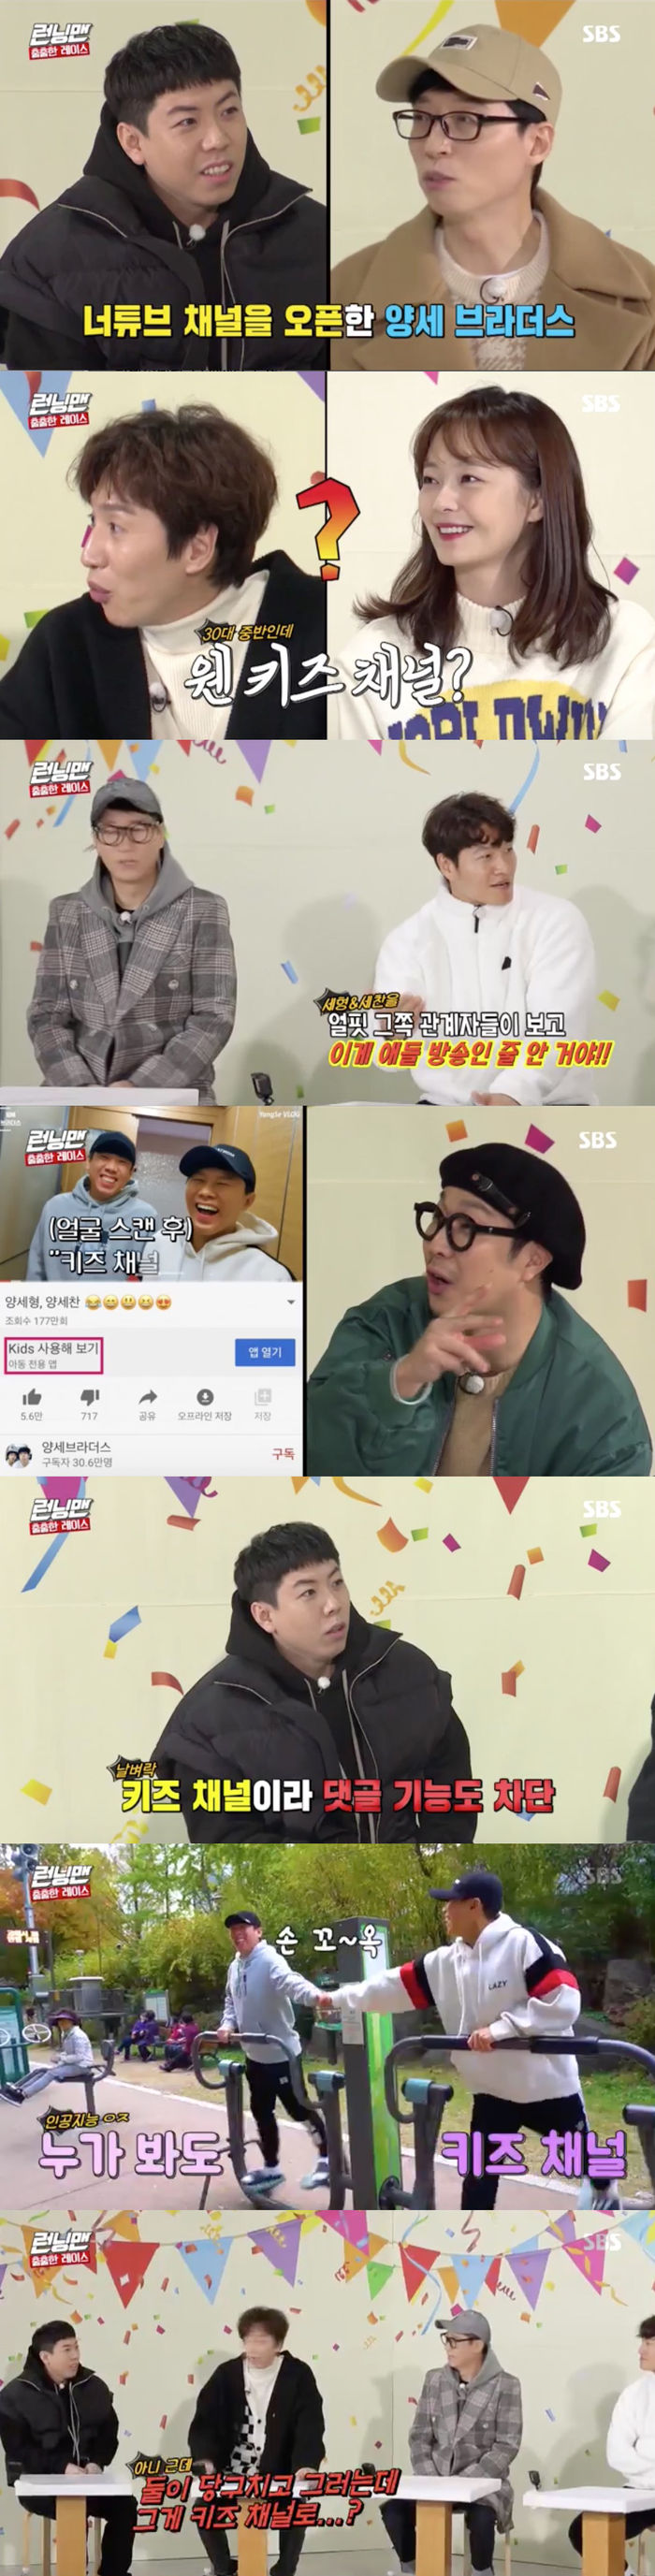 Why did Yang Se-chan and Yang Se-chans personal broadcast channels become Kids channels?On SBS Running Man broadcasted on the 9th, it announced the current status of Running Man before the full-scale race.On the day of the broadcast, Yoo Jae-Suk said, There has been a person who has recently become an Internet star.I started a nut tube with a big, big, and a nut tube, he laughed. Ji Suk-jin asked, Really? Why did you do that? Kim Jong Kook explained, At first glance, I thought it was a childrens broadcast. Haha also said, The computer automatically sorts after a face scan, but it is classified as a Kids channel.So Comment was also unable to get rid of it. Its been moved over to Kids and the Comment feature is blocked, Yang Se-chan said.Lee Kwang-soo laughed and laughed, No, what kind of Kids channel are you playing billiards?